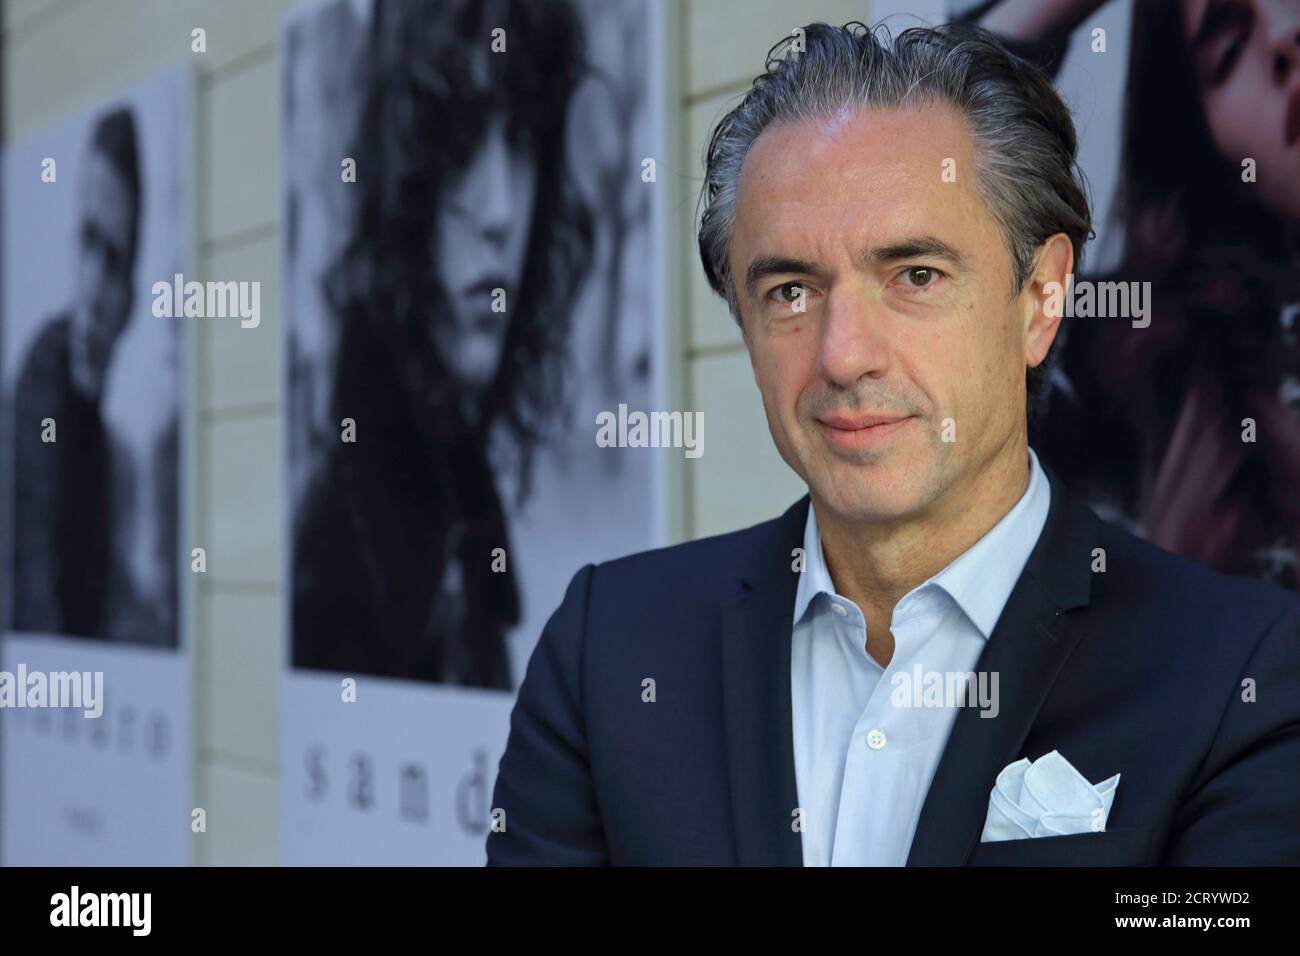 Daniel Lalonde, President and CEO of SMCP (Sandro, Maje, Claudie Pierlot),  poses at the company headquarters in Paris, France, October 9, 2015. SMCP,  the group behind French fashion brands Sandro, Maje and